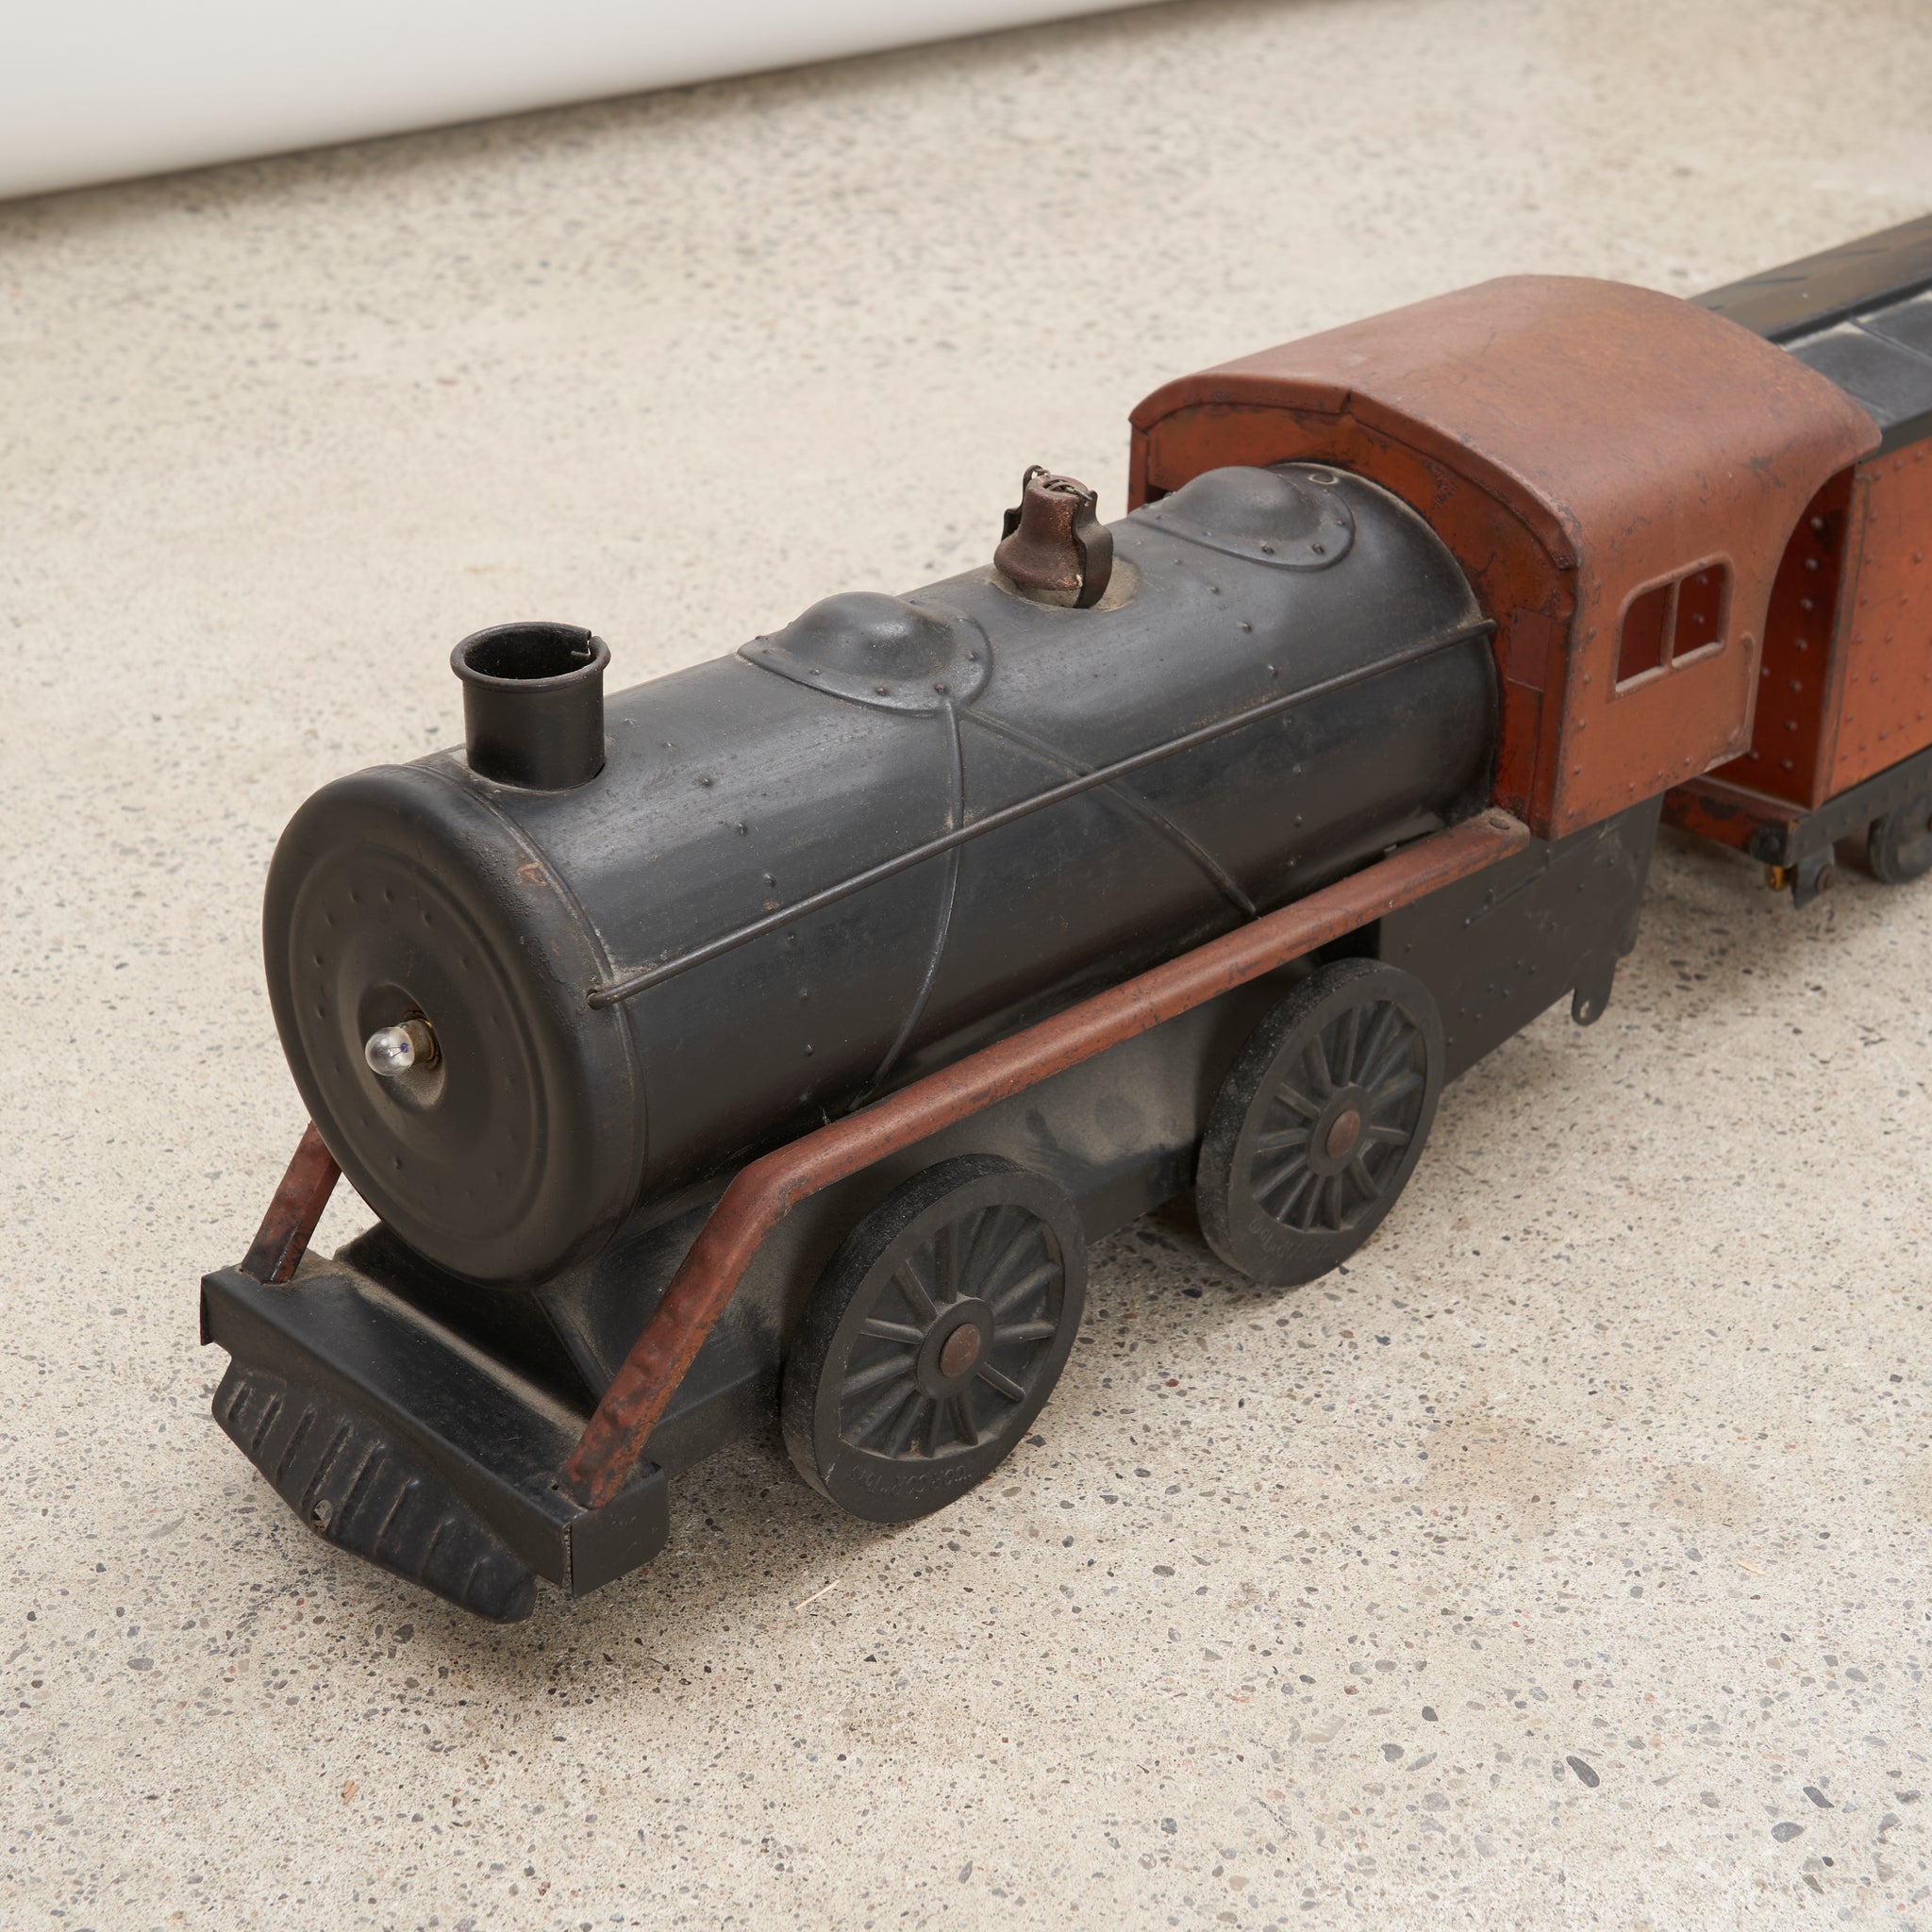 1930's 'Cor-Cor' Toy Train Set by Corcoran Mfg. Co.